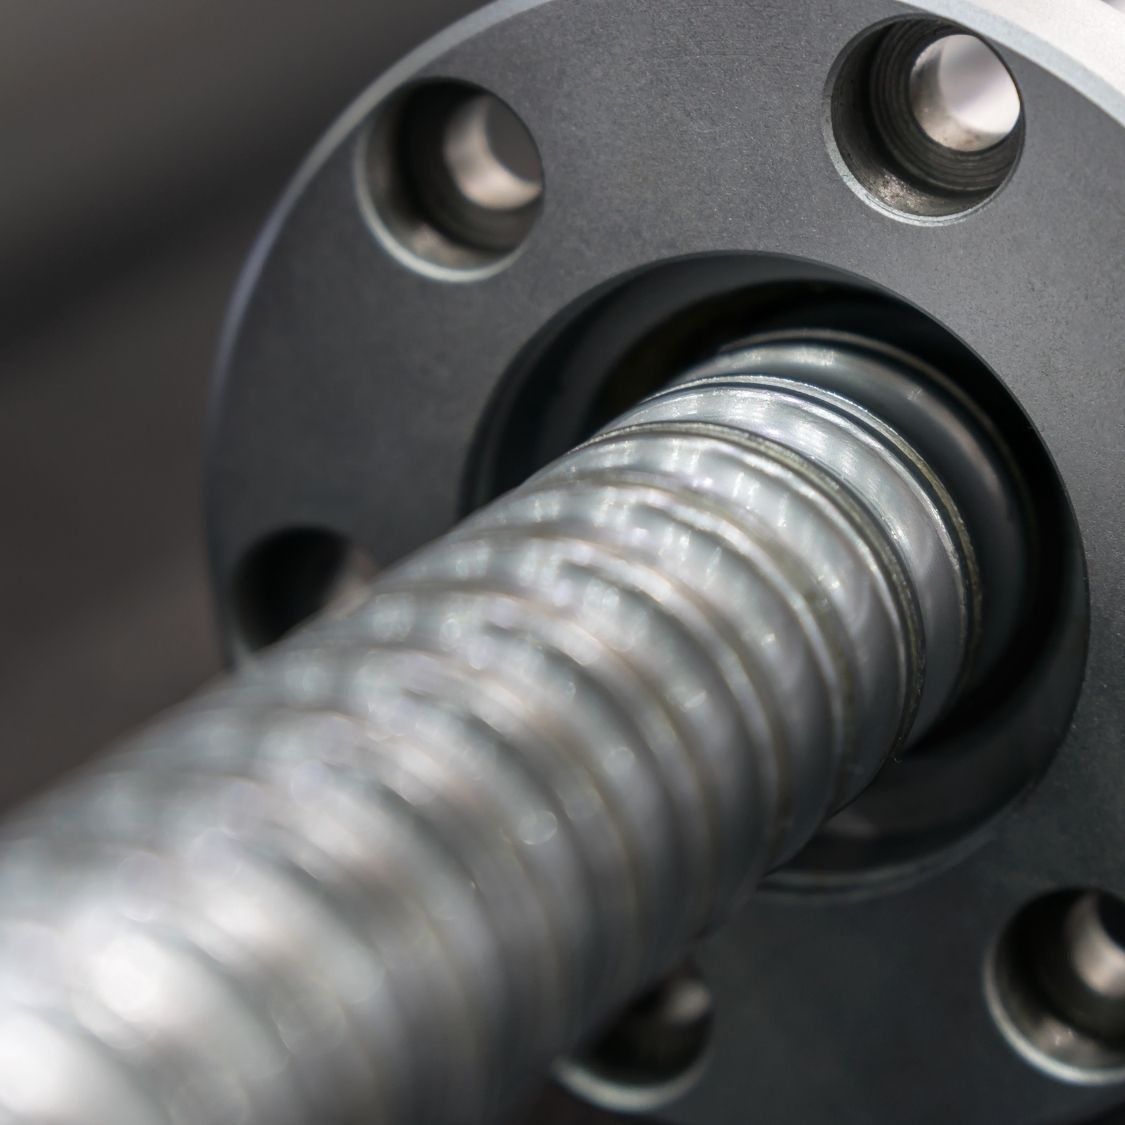 Signs Your Ball Screws Are Experiencing Problems